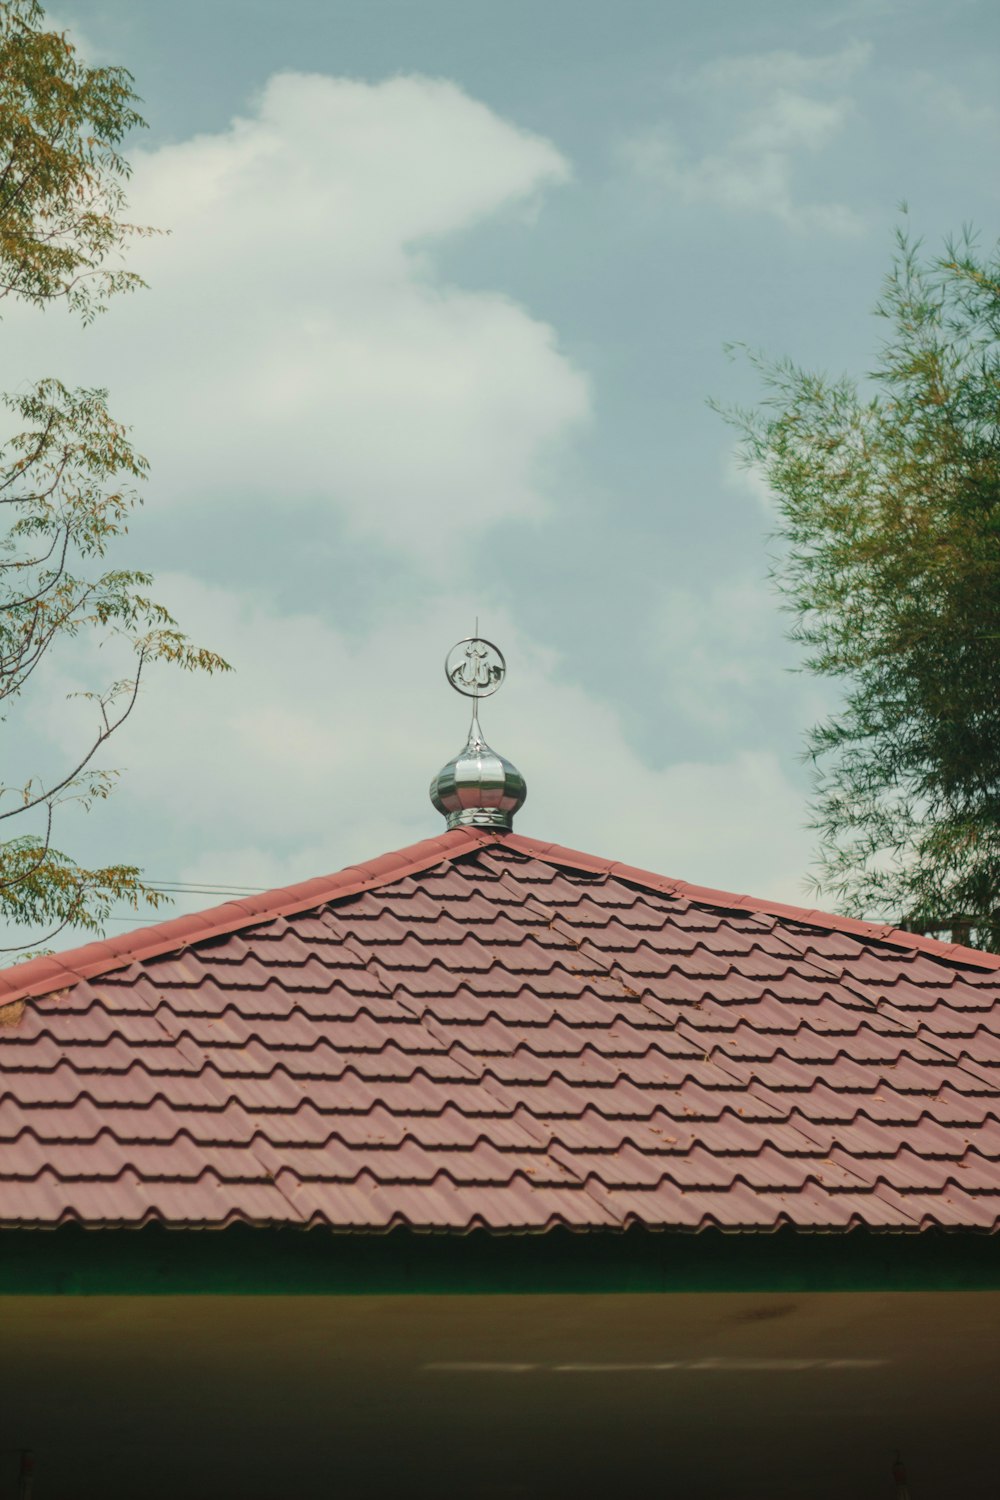 a red roof with a weather vane on top